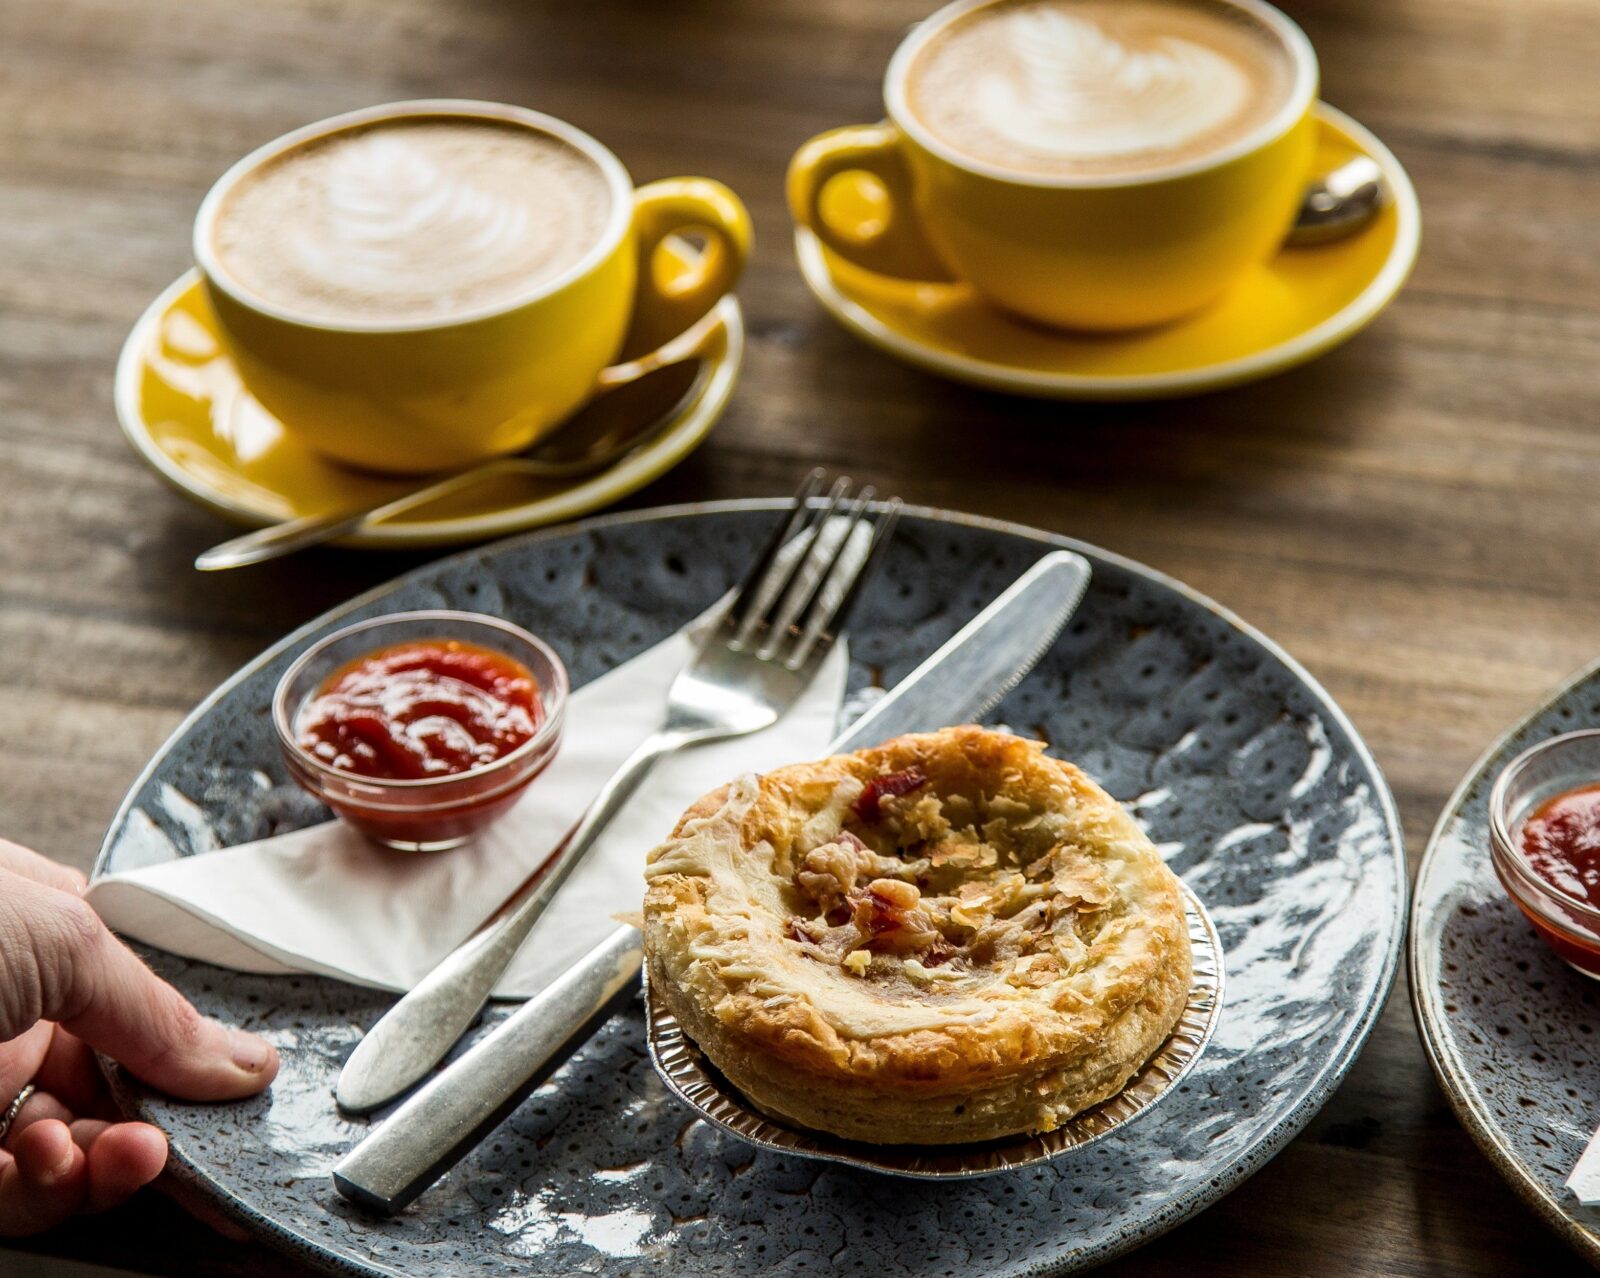 Coffee and pies available from The Village Grocer, Carcoar